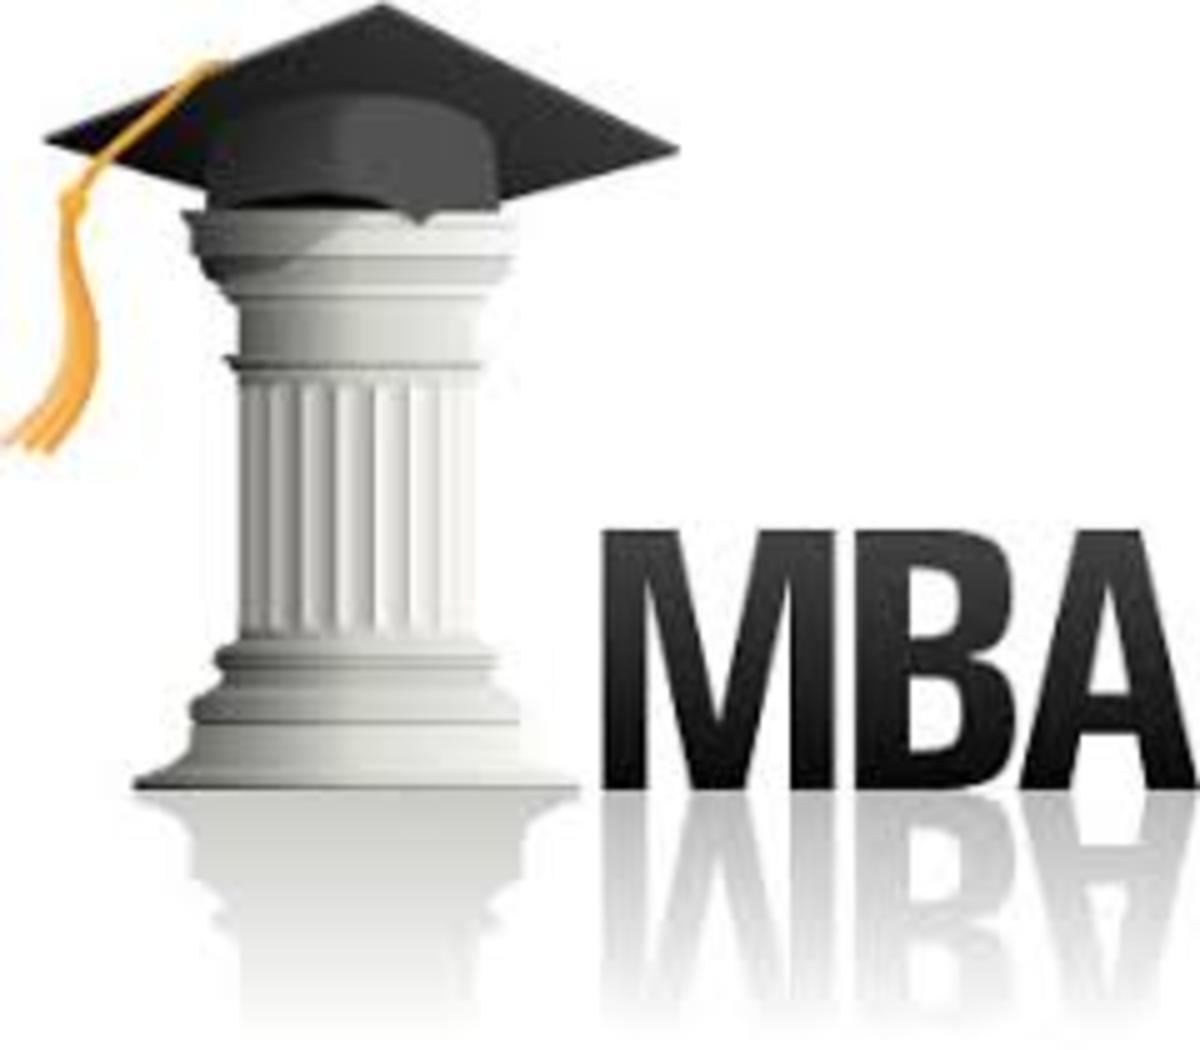 The coveted MBA degree can open many doors to career advancement and higher salaries; however, it is not for everyone.